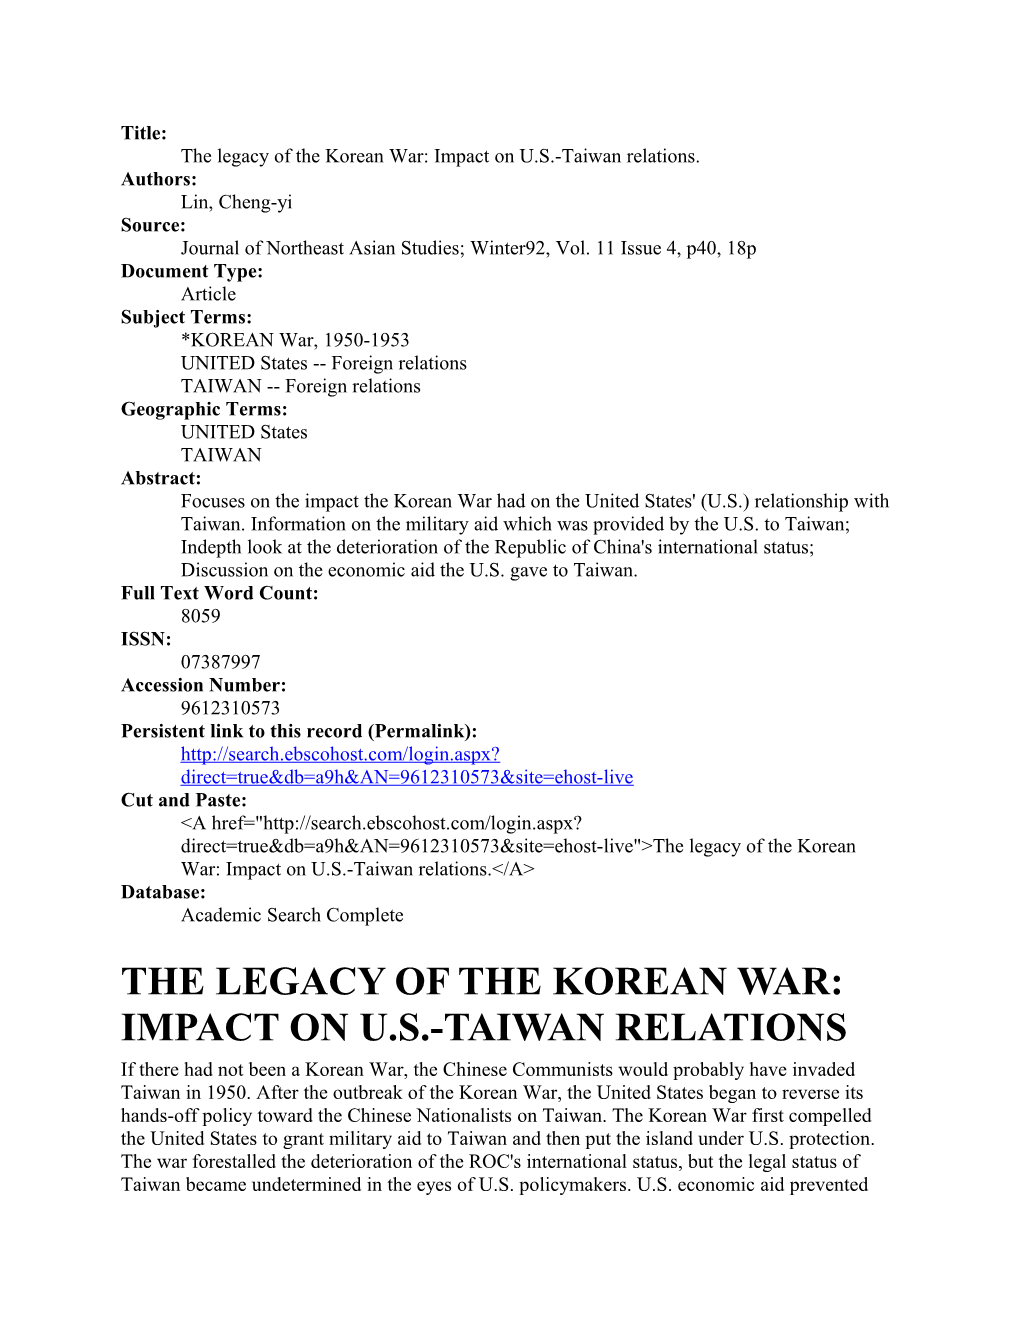 The Legacy of the Korean War: Impact on U.S.-Taiwan Relations